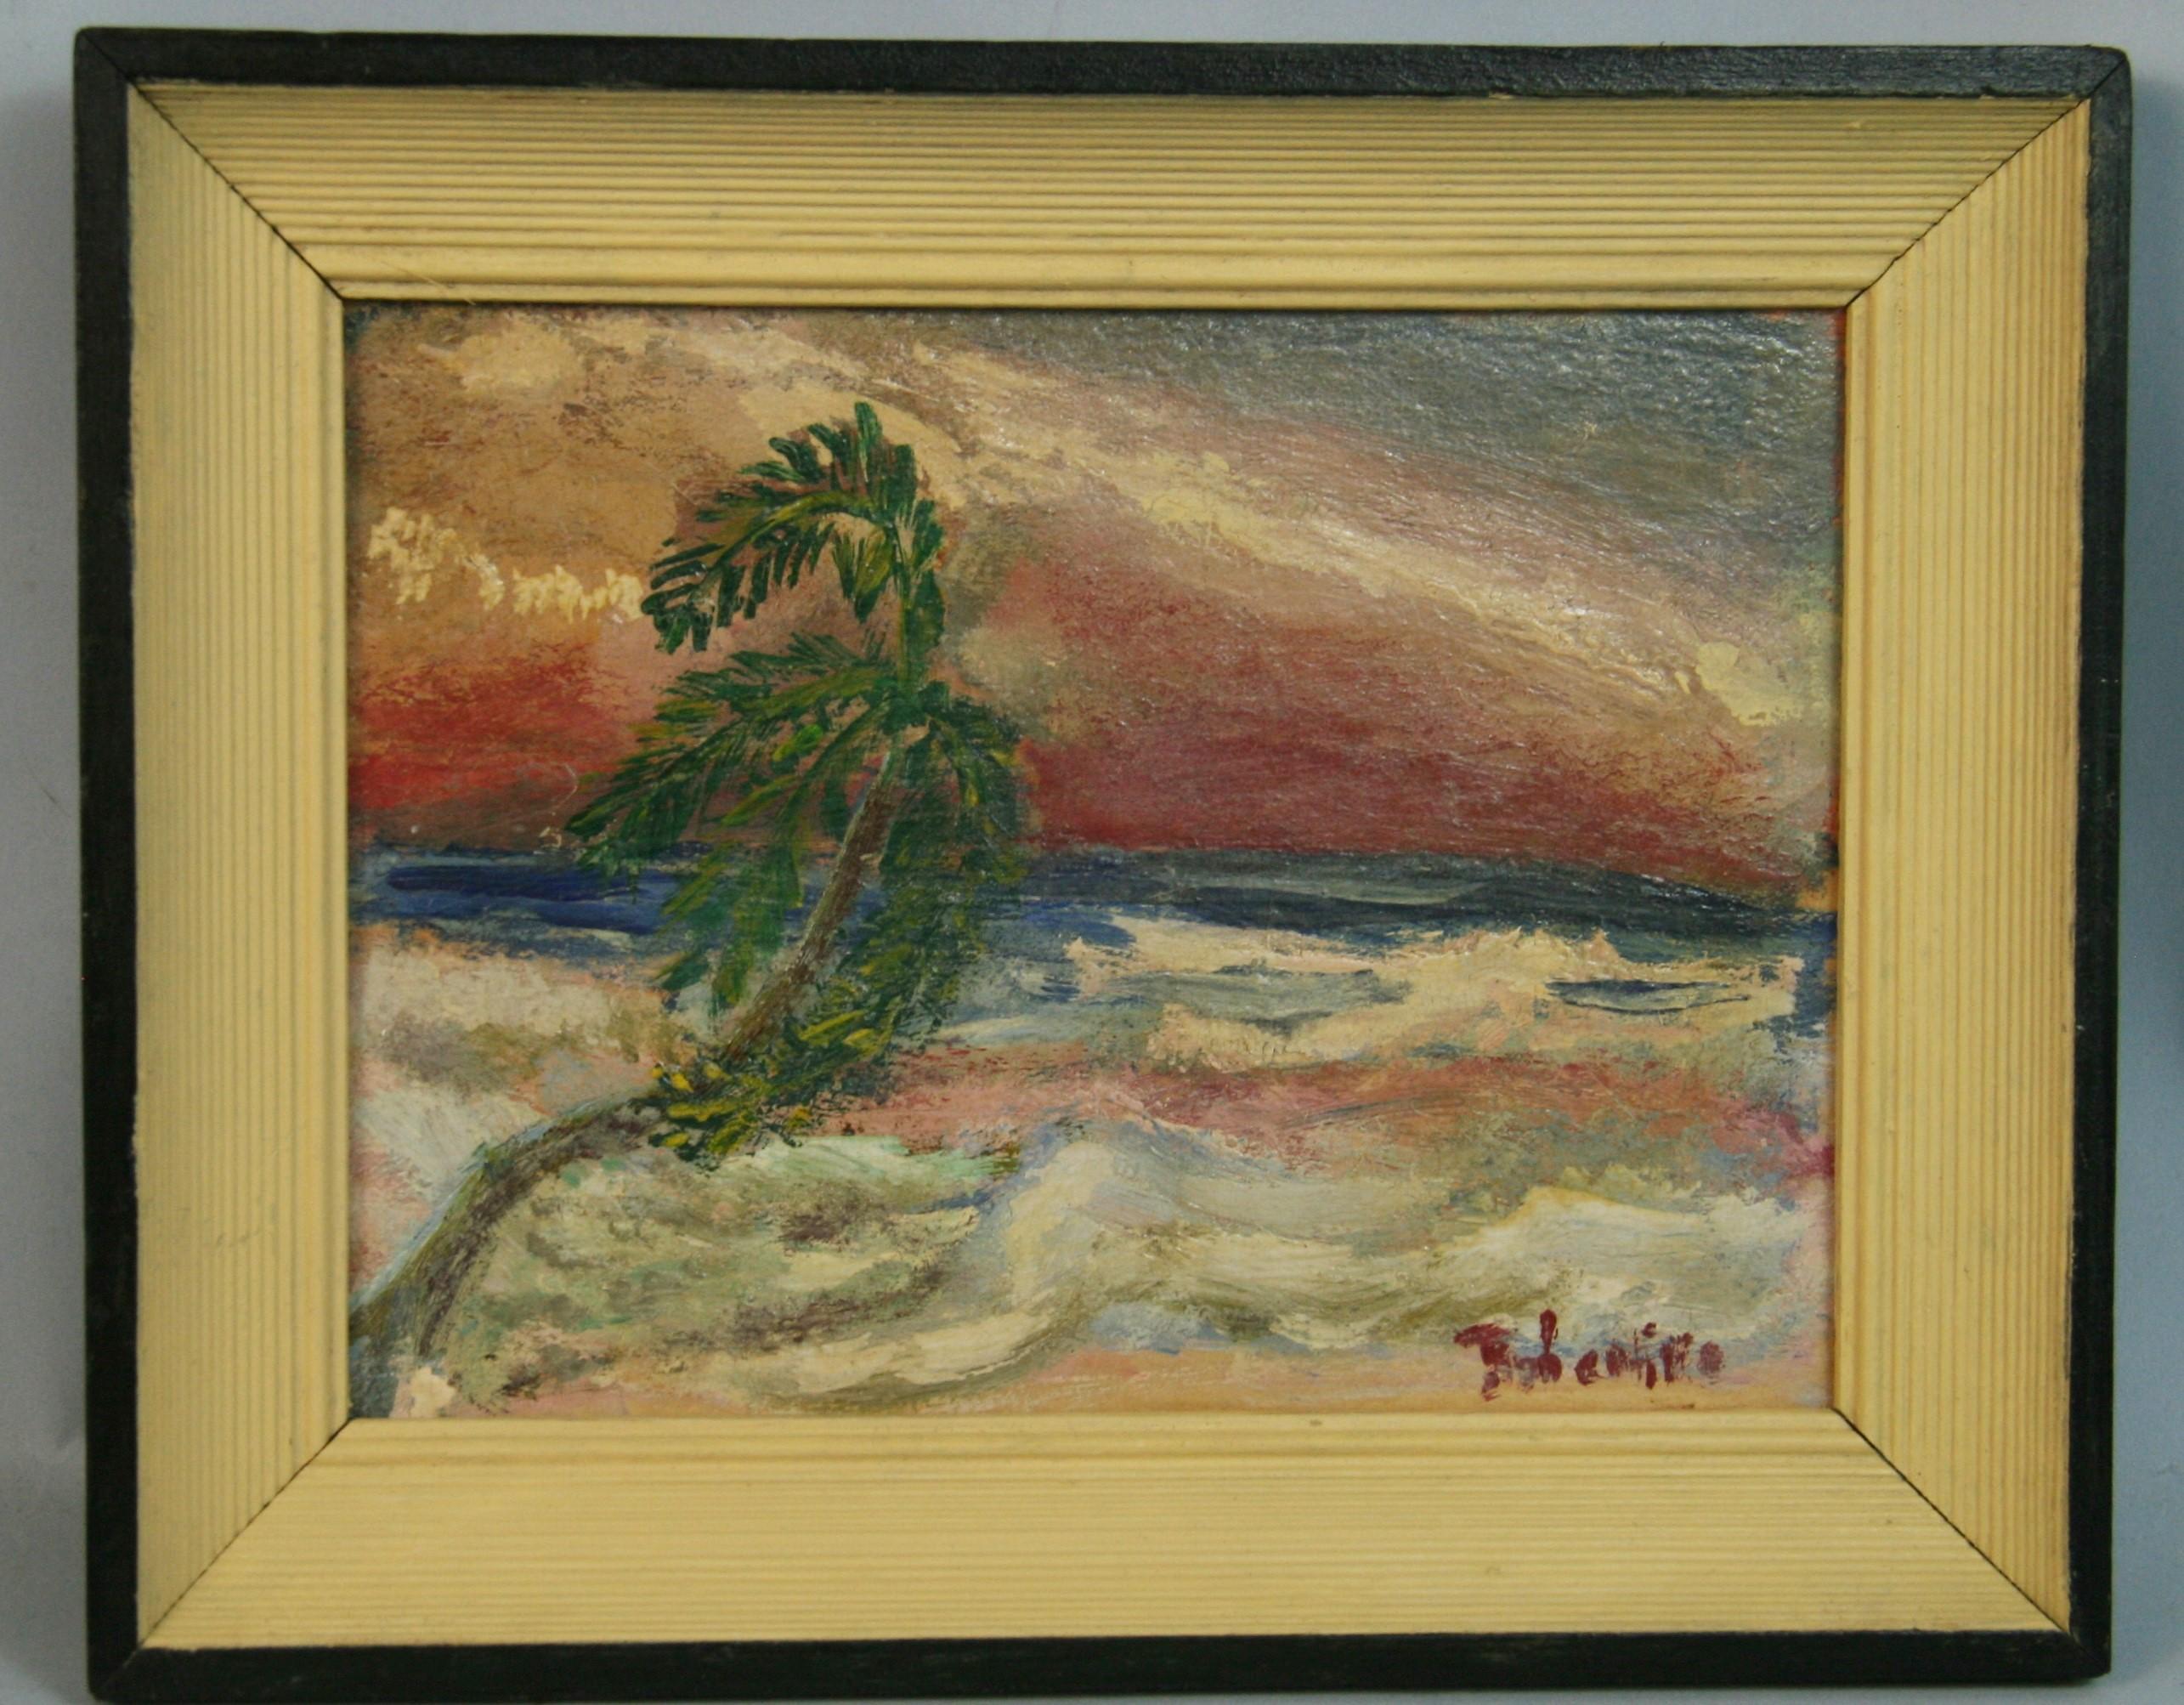 5054 Vintage American tropical seacape 
Set in period wood frame
Image size 5.75x7.75